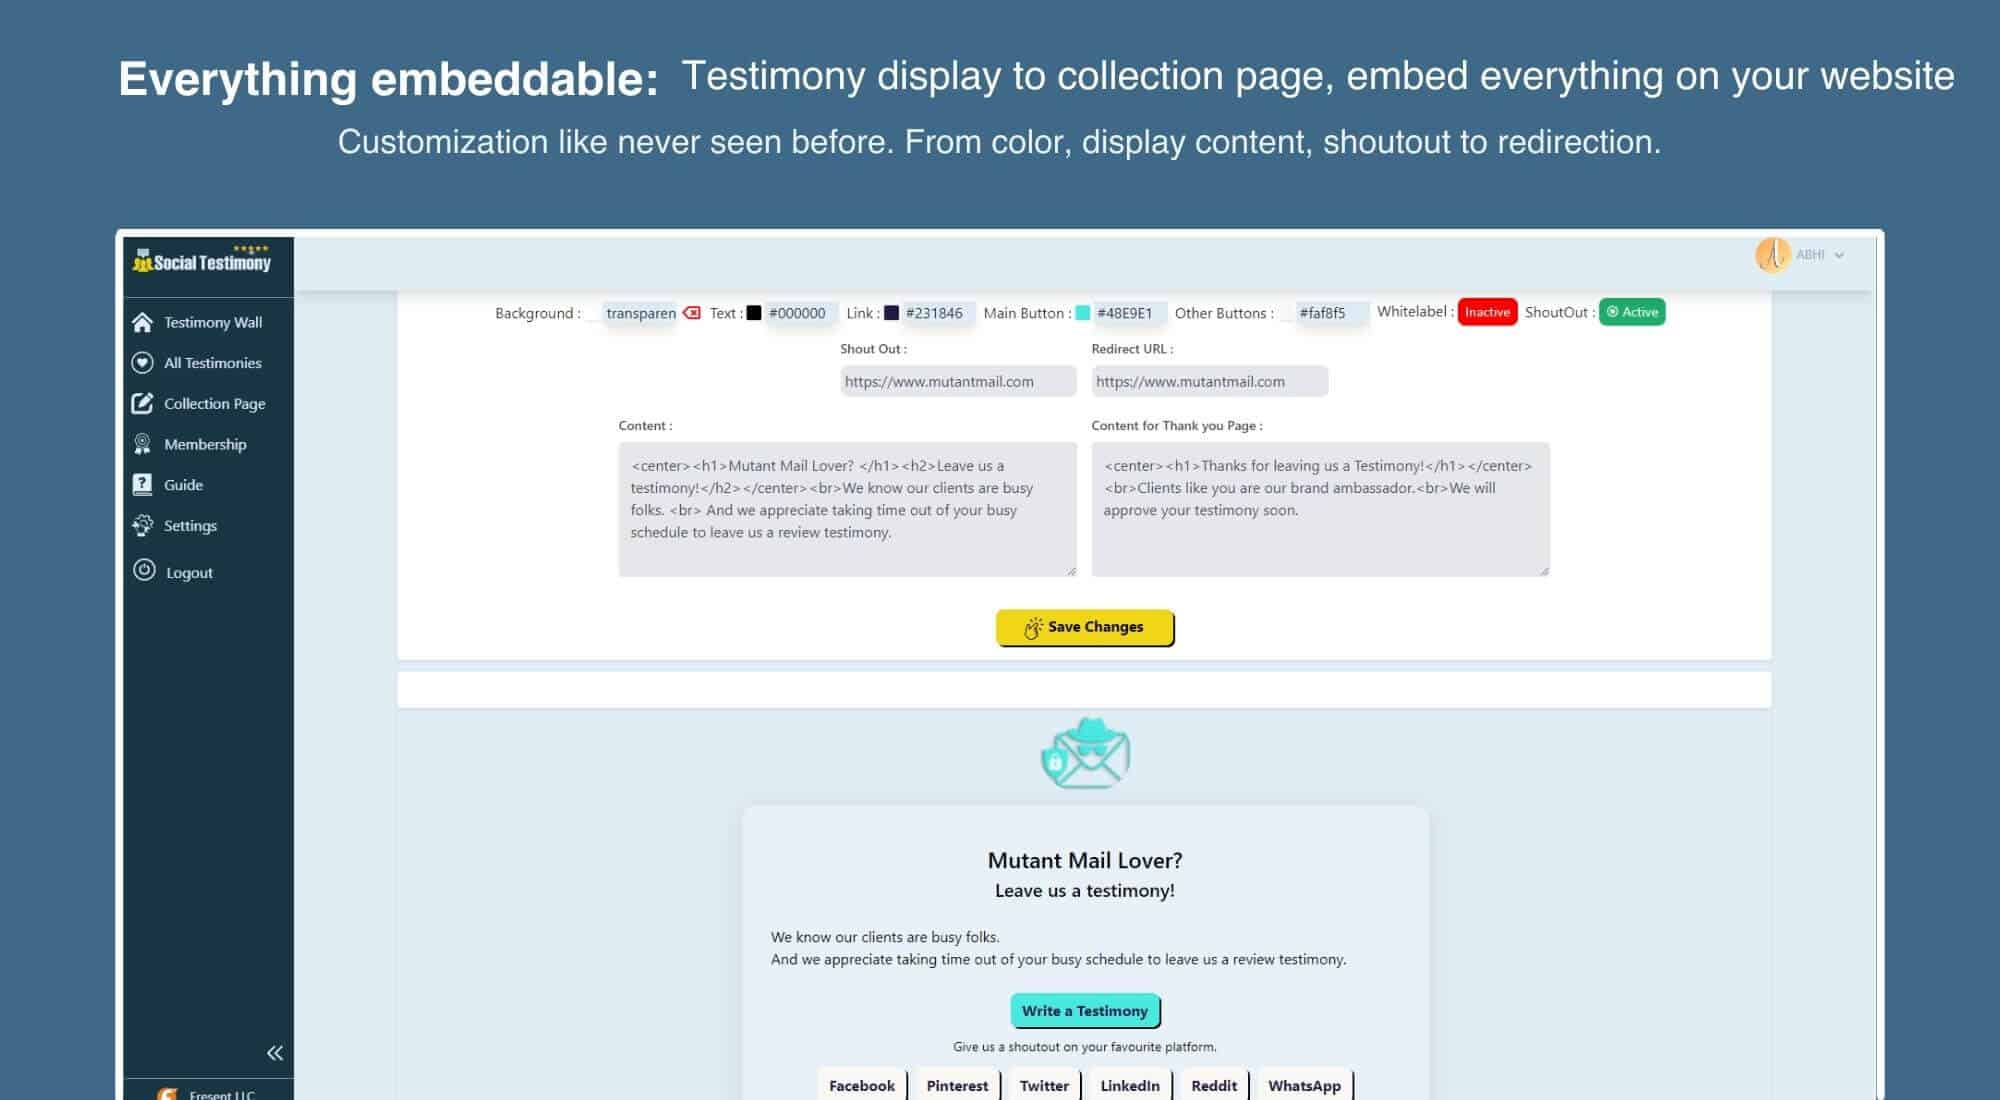 Embeddable feature